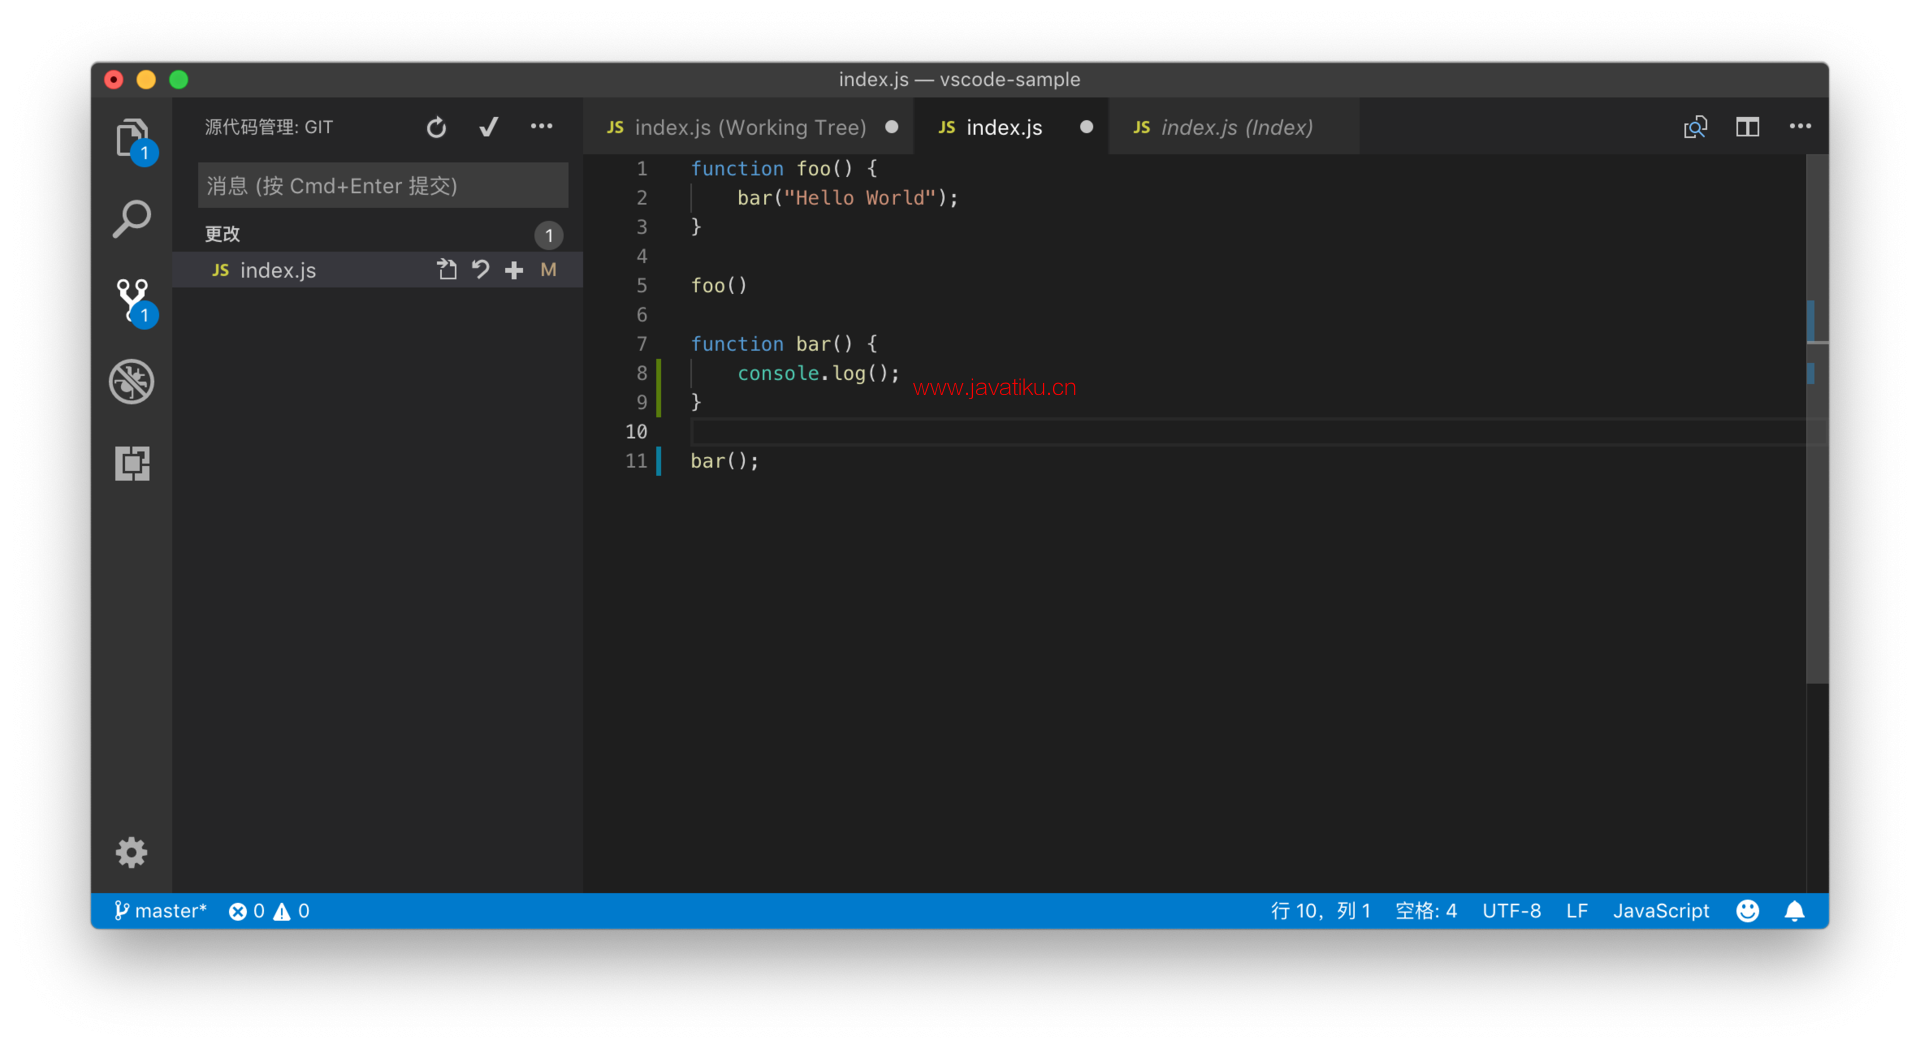 vscode-editor-built-in-version-management-actions-01.png